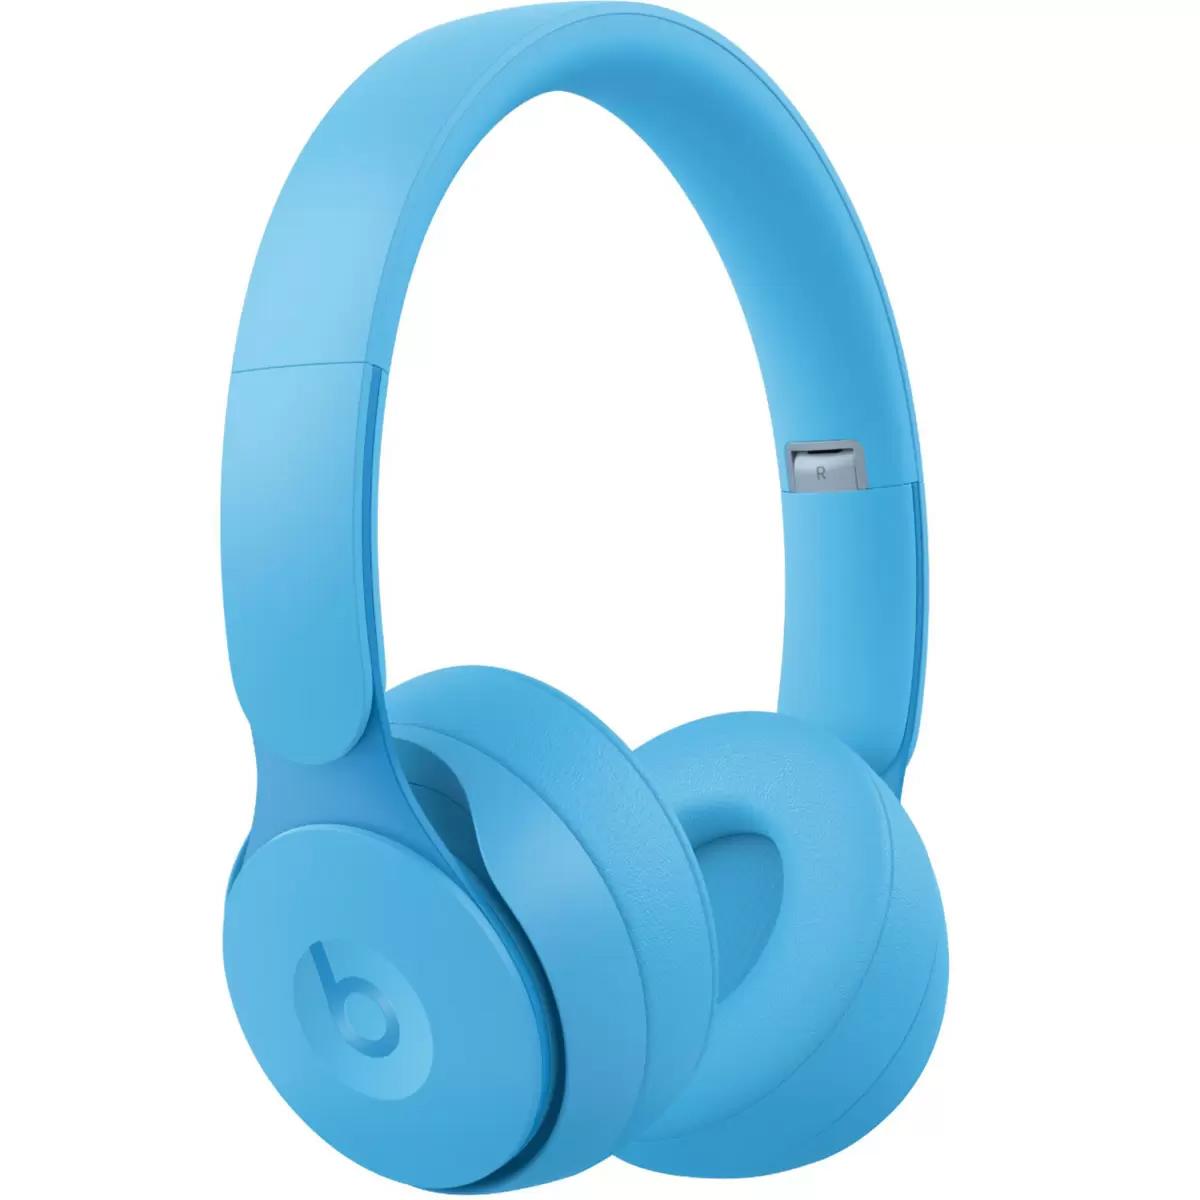 Beats Solo Pro Wireless Noise Cancelling On-Ear Headphones for $134.99 Shipped